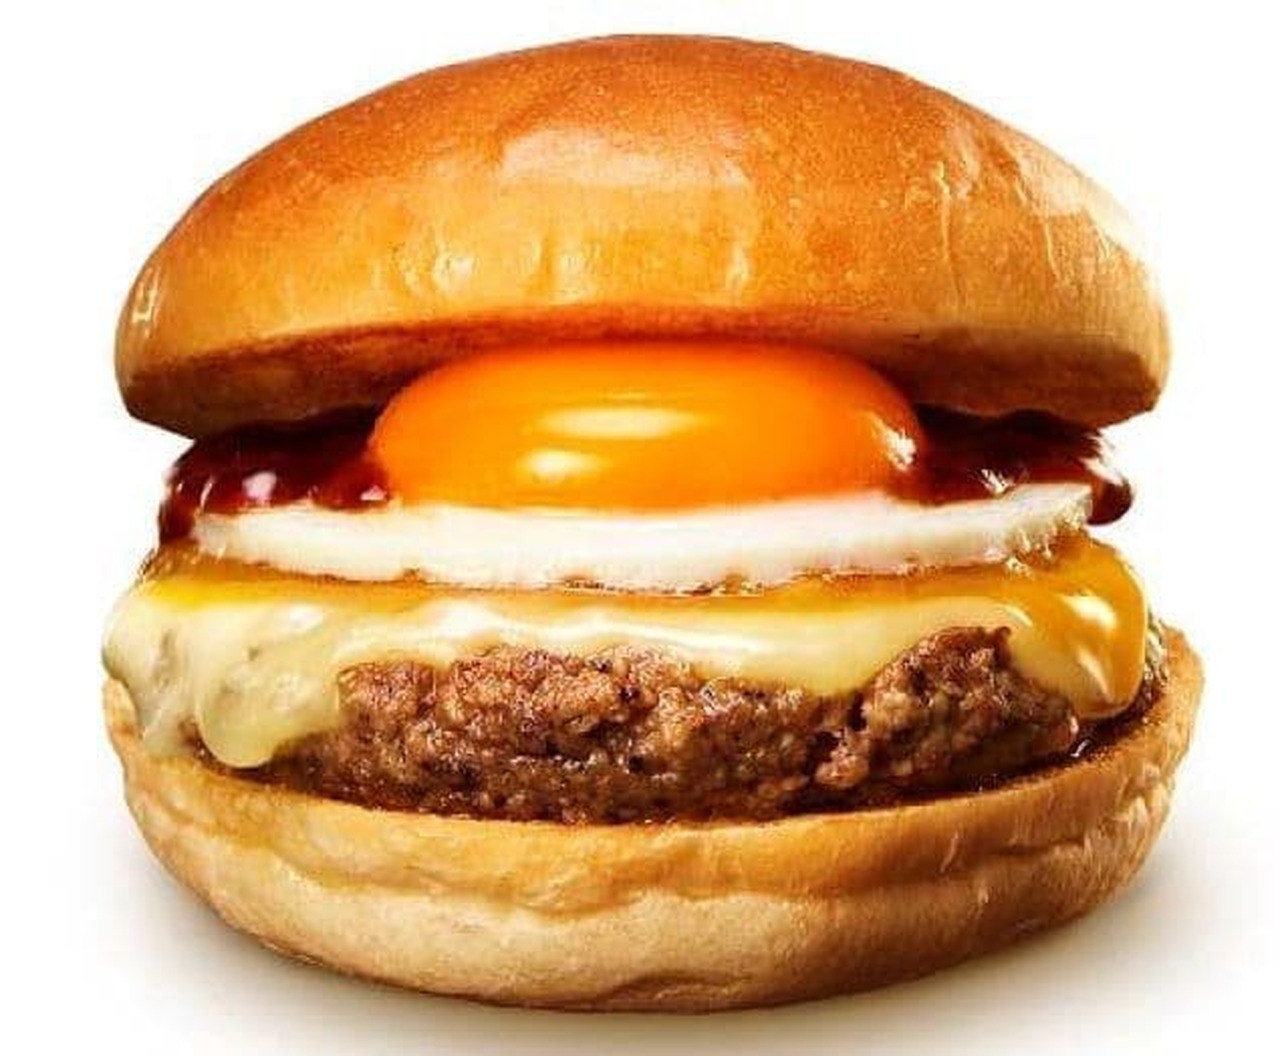 Lotteria "Japanese-style soft-boiled moon viewing exquisite cheeseburger"